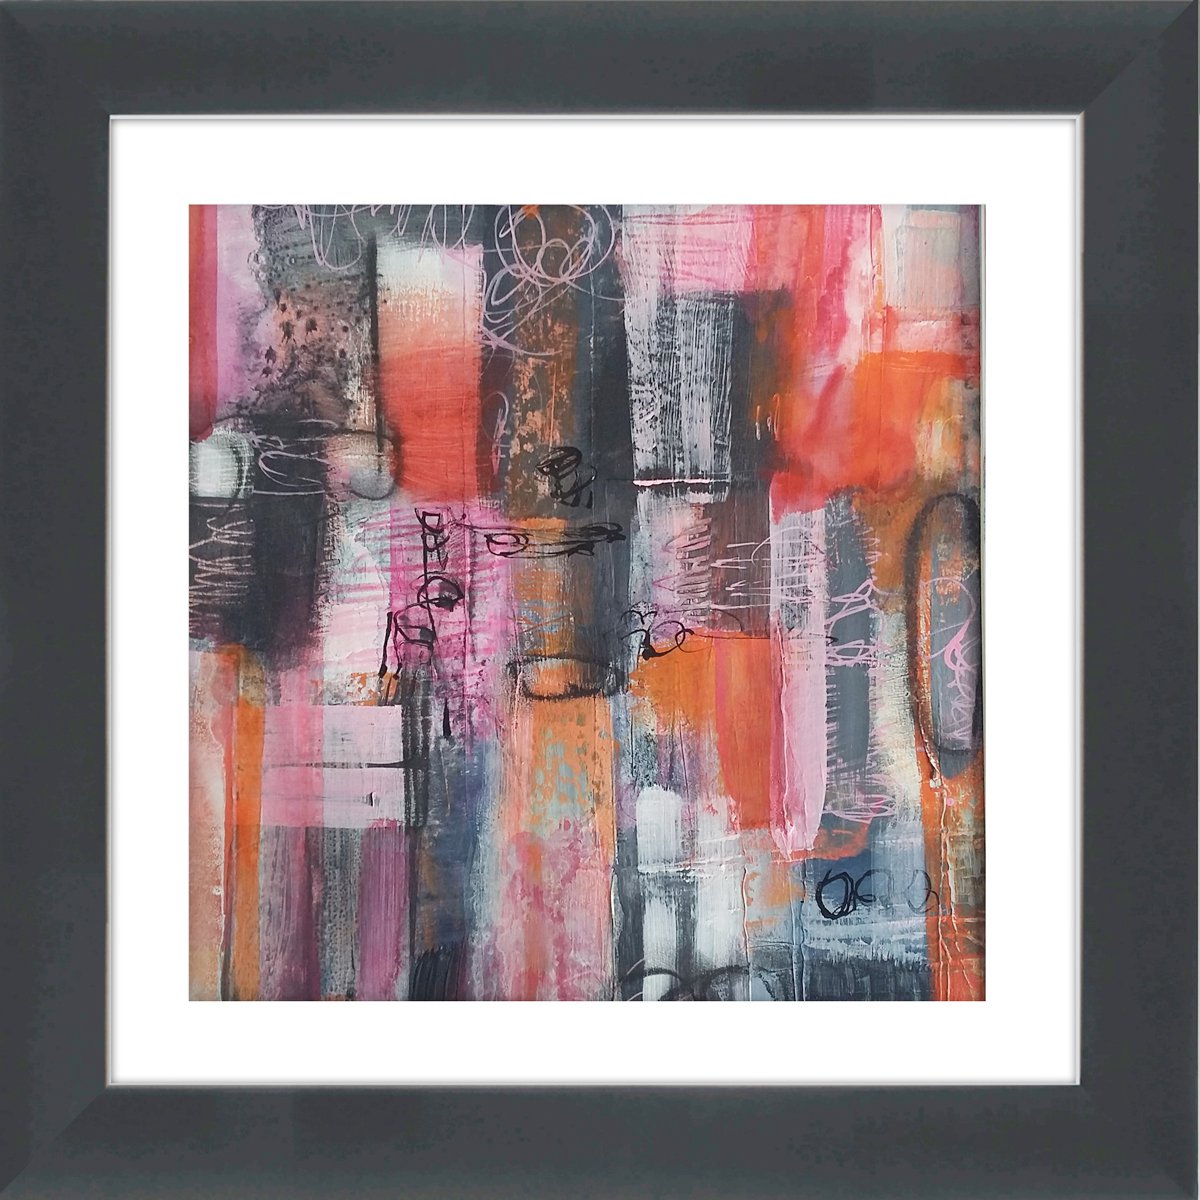 Abstraction #17 - Framed and ready to hang - original abstract painting by Carolynne Coulson